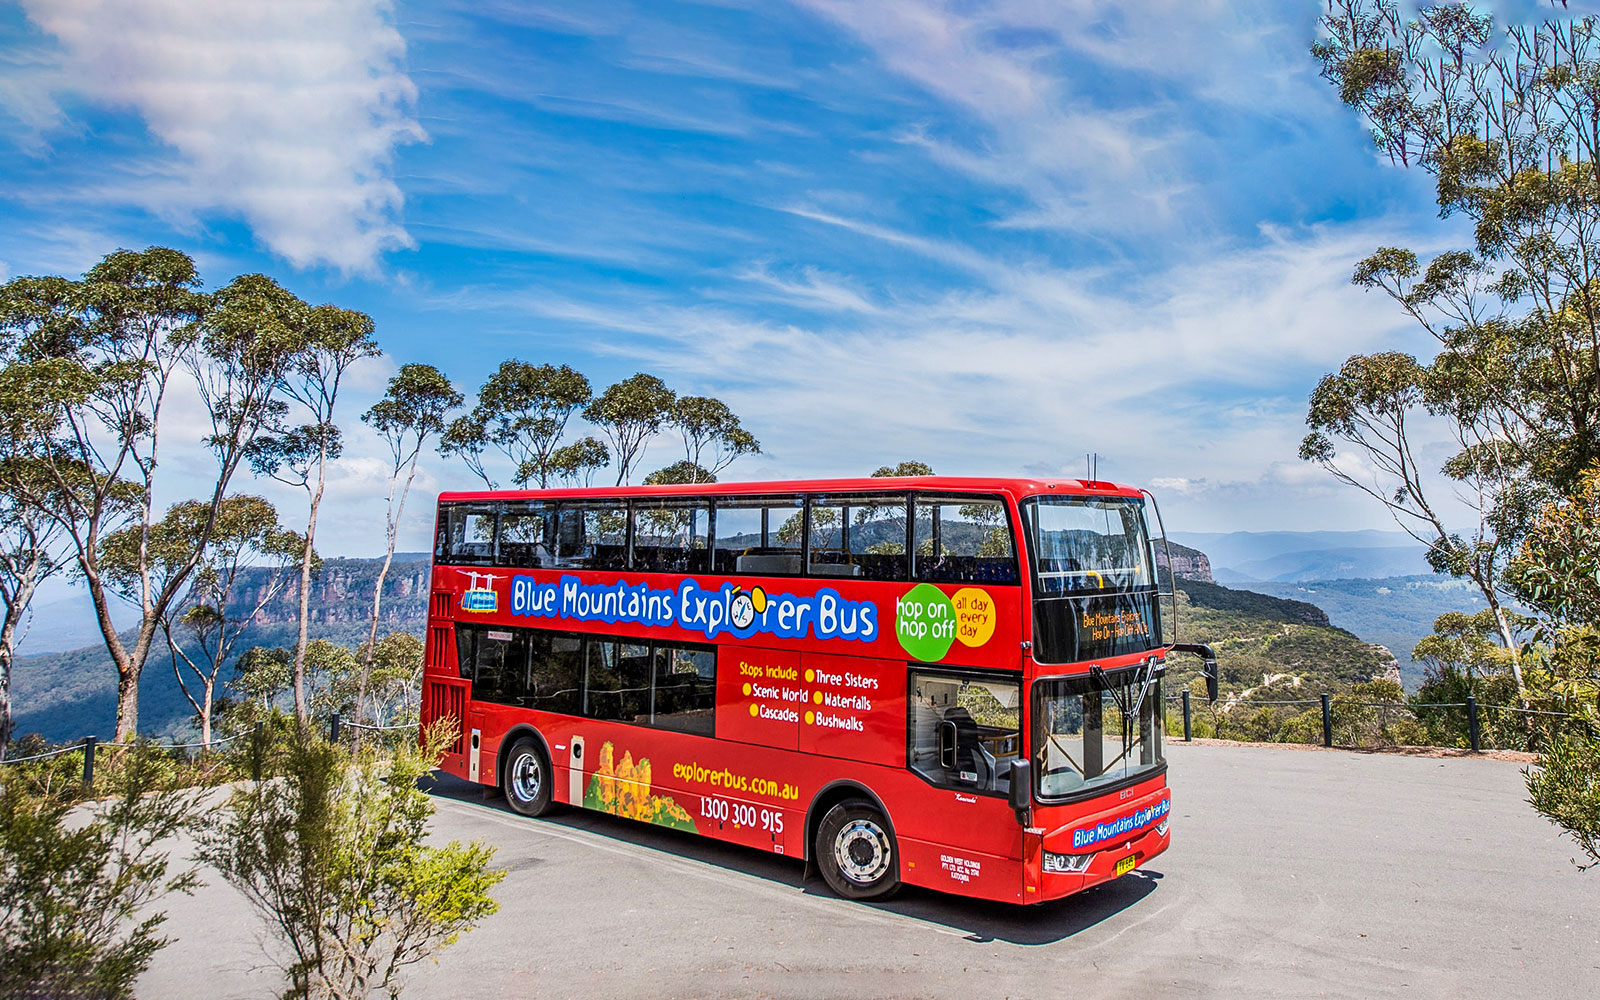 Image of Explorer Bus: 1-Day Hop-On Hop-Off Tour of Blue Mountains with Optional Scenic World Pass & Special Offer